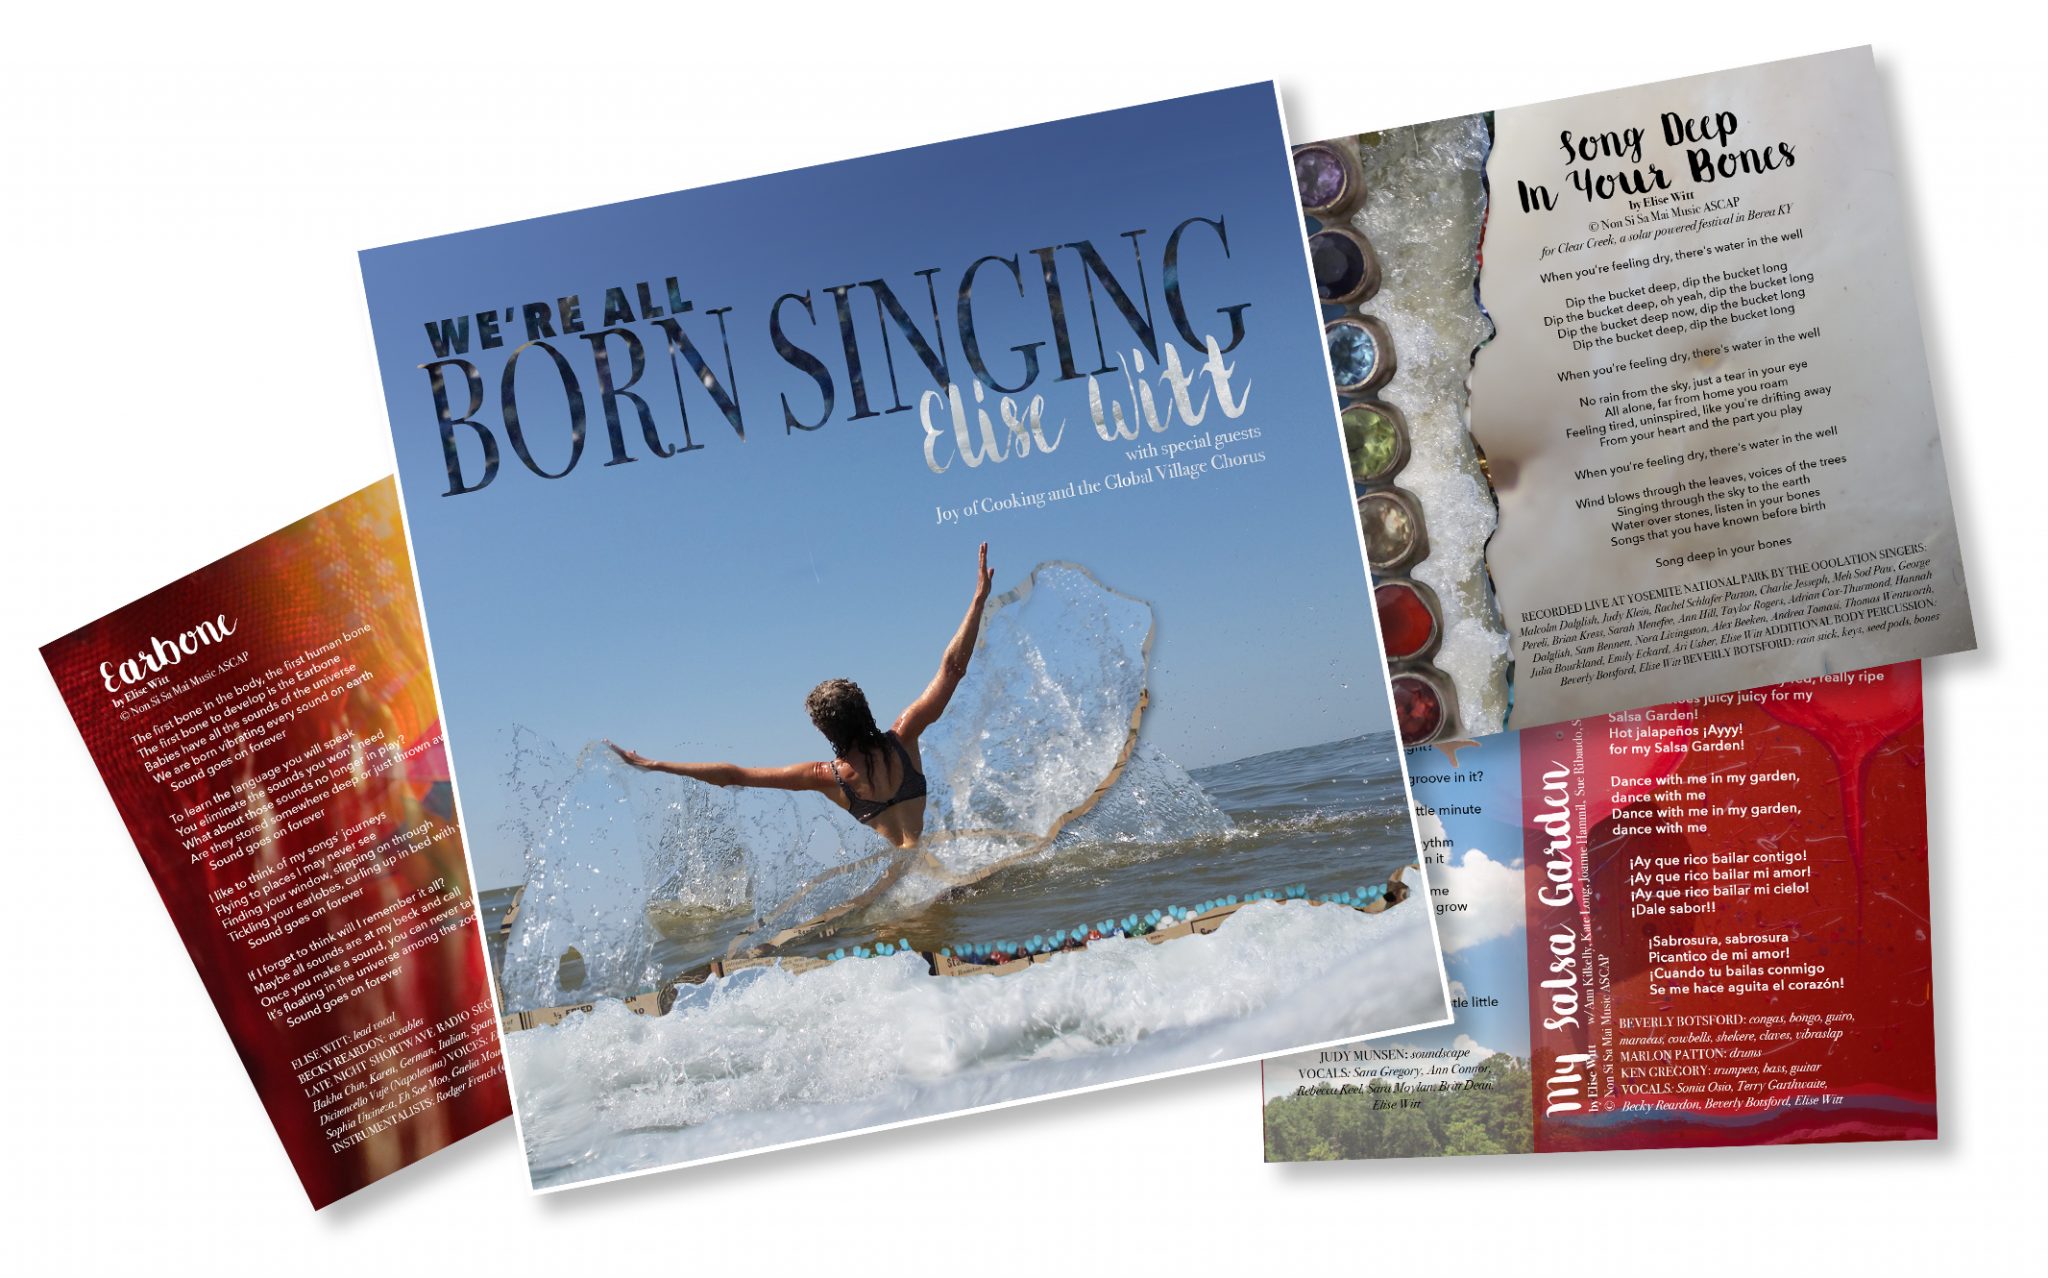 We’re All BORN SINGING – the New CD by Elise Witt